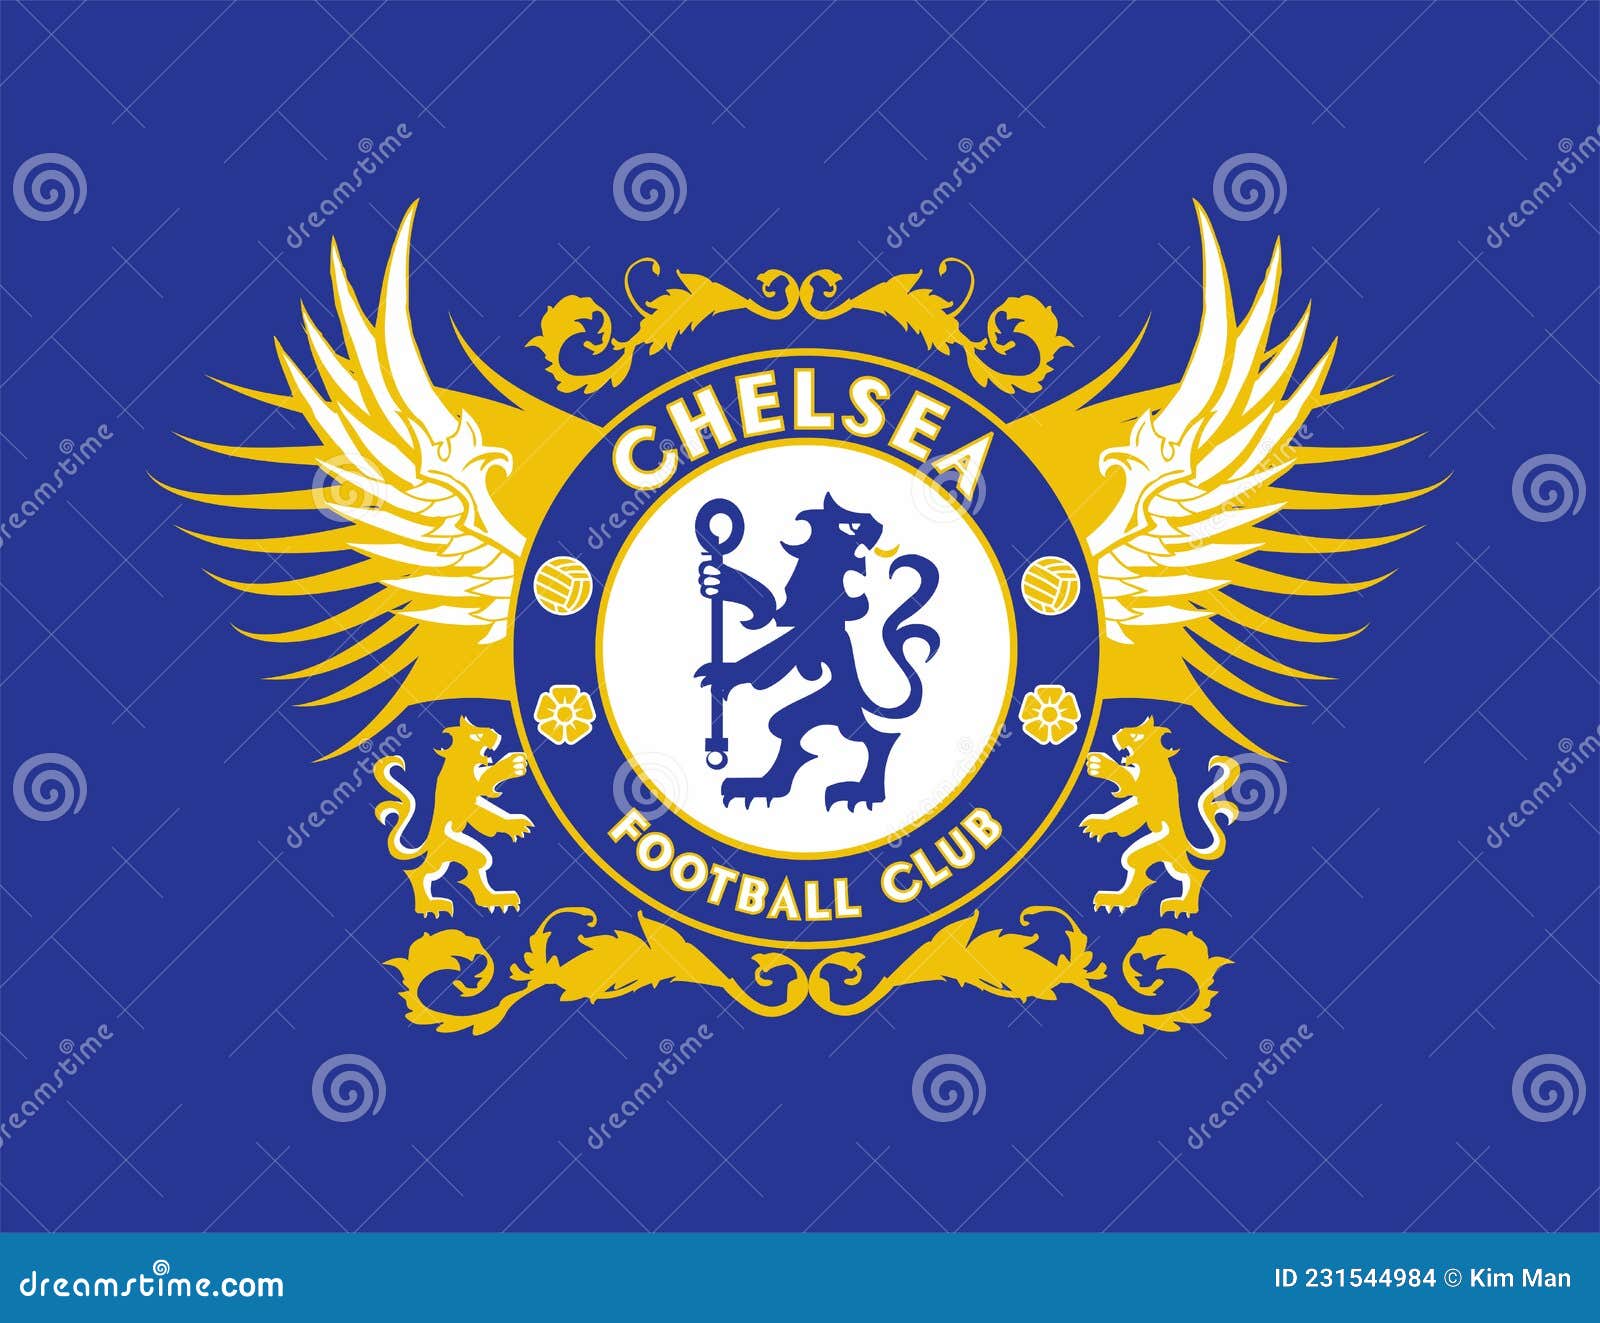 The Blues Chelsea FC. England Football Club Editorial Stock Image ...